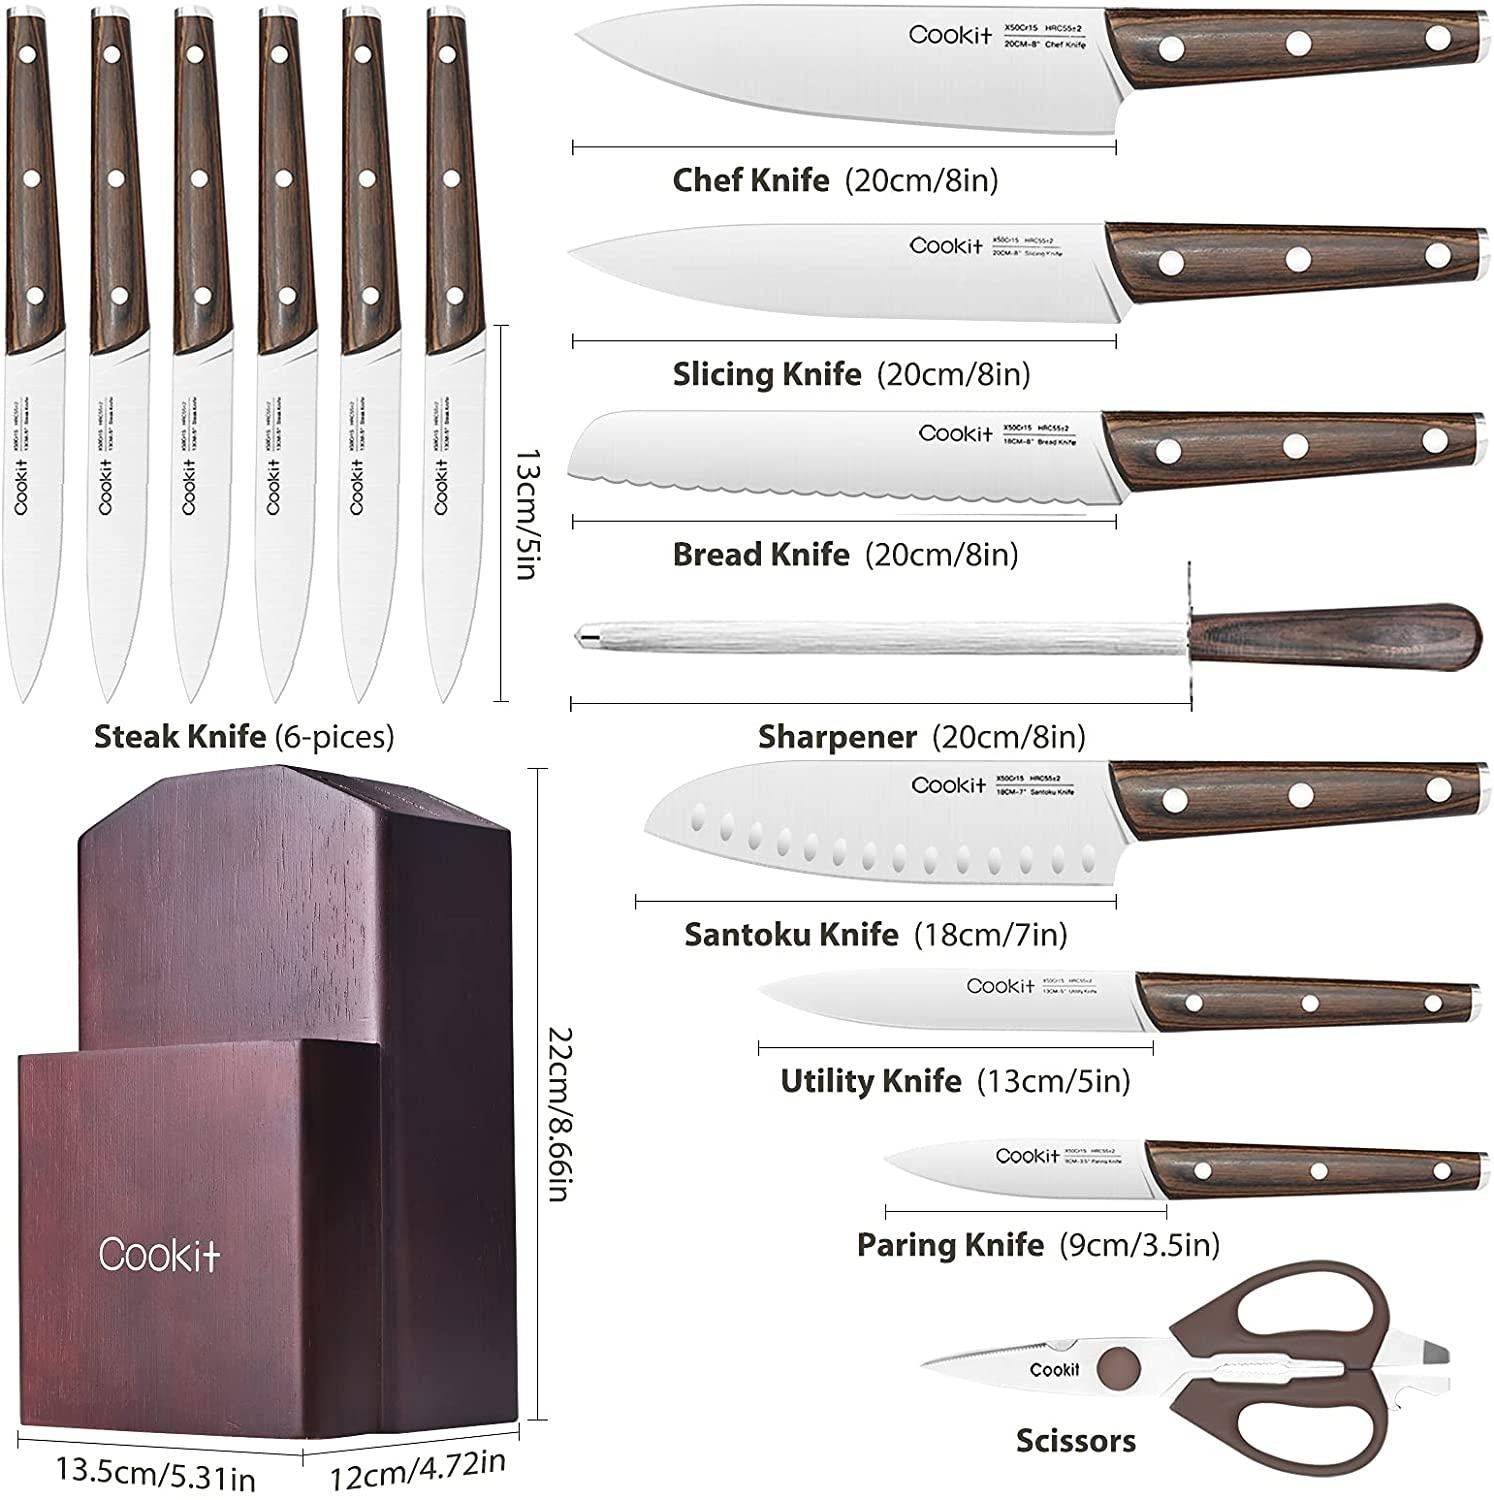 Kitchen Knife Sets, Cookit 15 Piece Knife Sets with Block for Kitchen Chef Knife Stainless Steel Knives Set Serrated Steak Knives with Manual Sharpener Knife - Demine Essentials